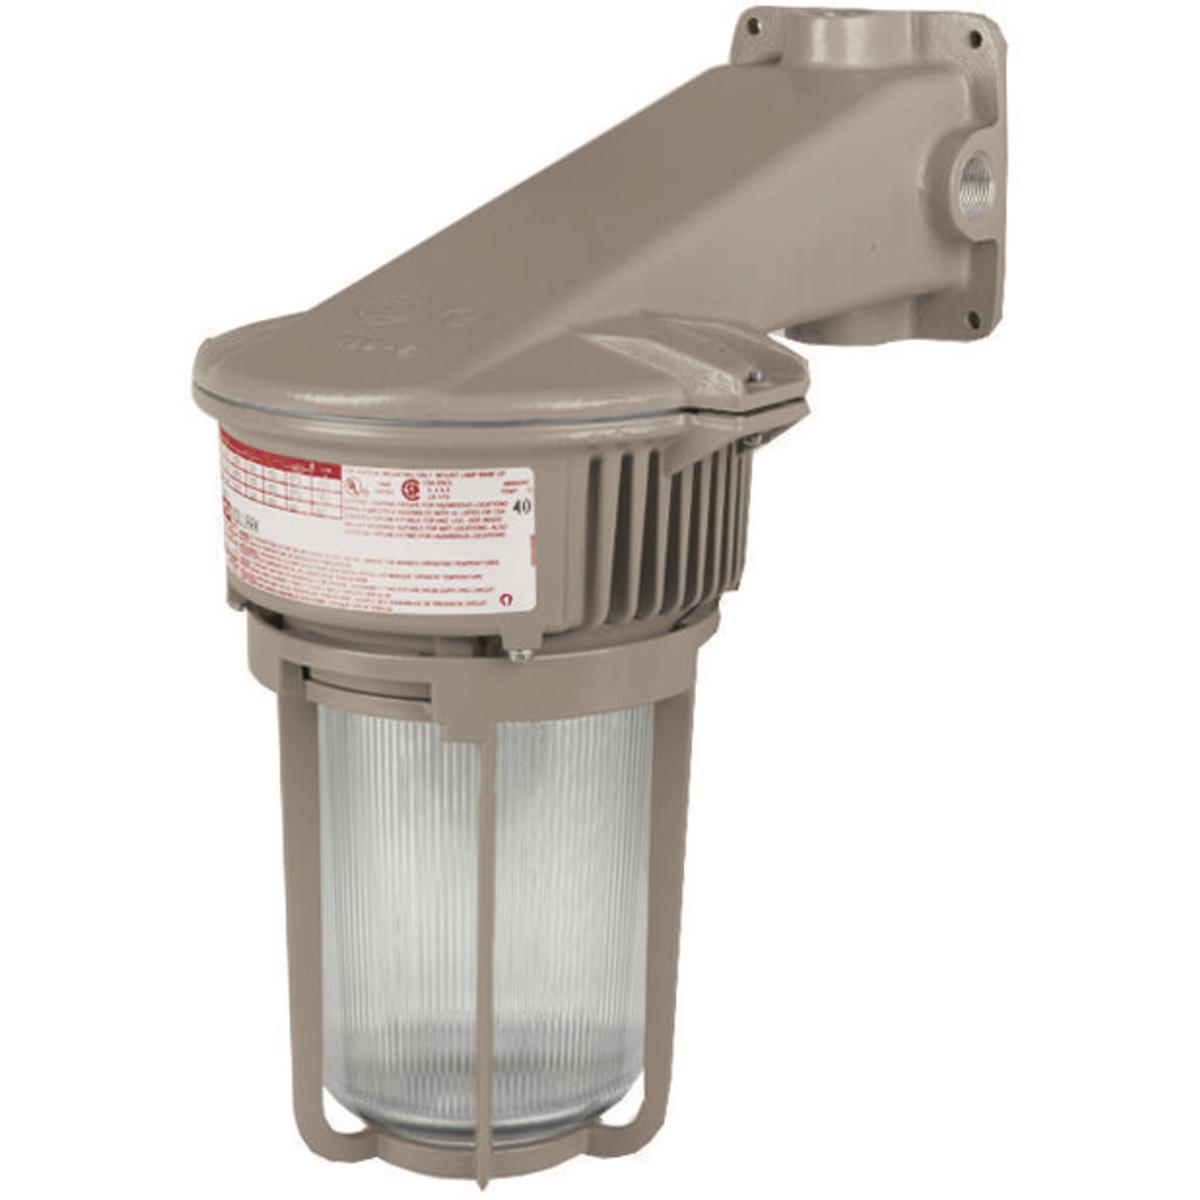 Hubbell MBF391-GGB2 39W Bi-Pin Fluorescent 120V 3/4" Wall Mount with Globe and Guard  ; Ballast tank and splice box – corrosion resistant copper-free aluminum alloy ; Baked powder epoxy/polyester finish, electrostatically applied for complete, uniform corrosion protection ; 